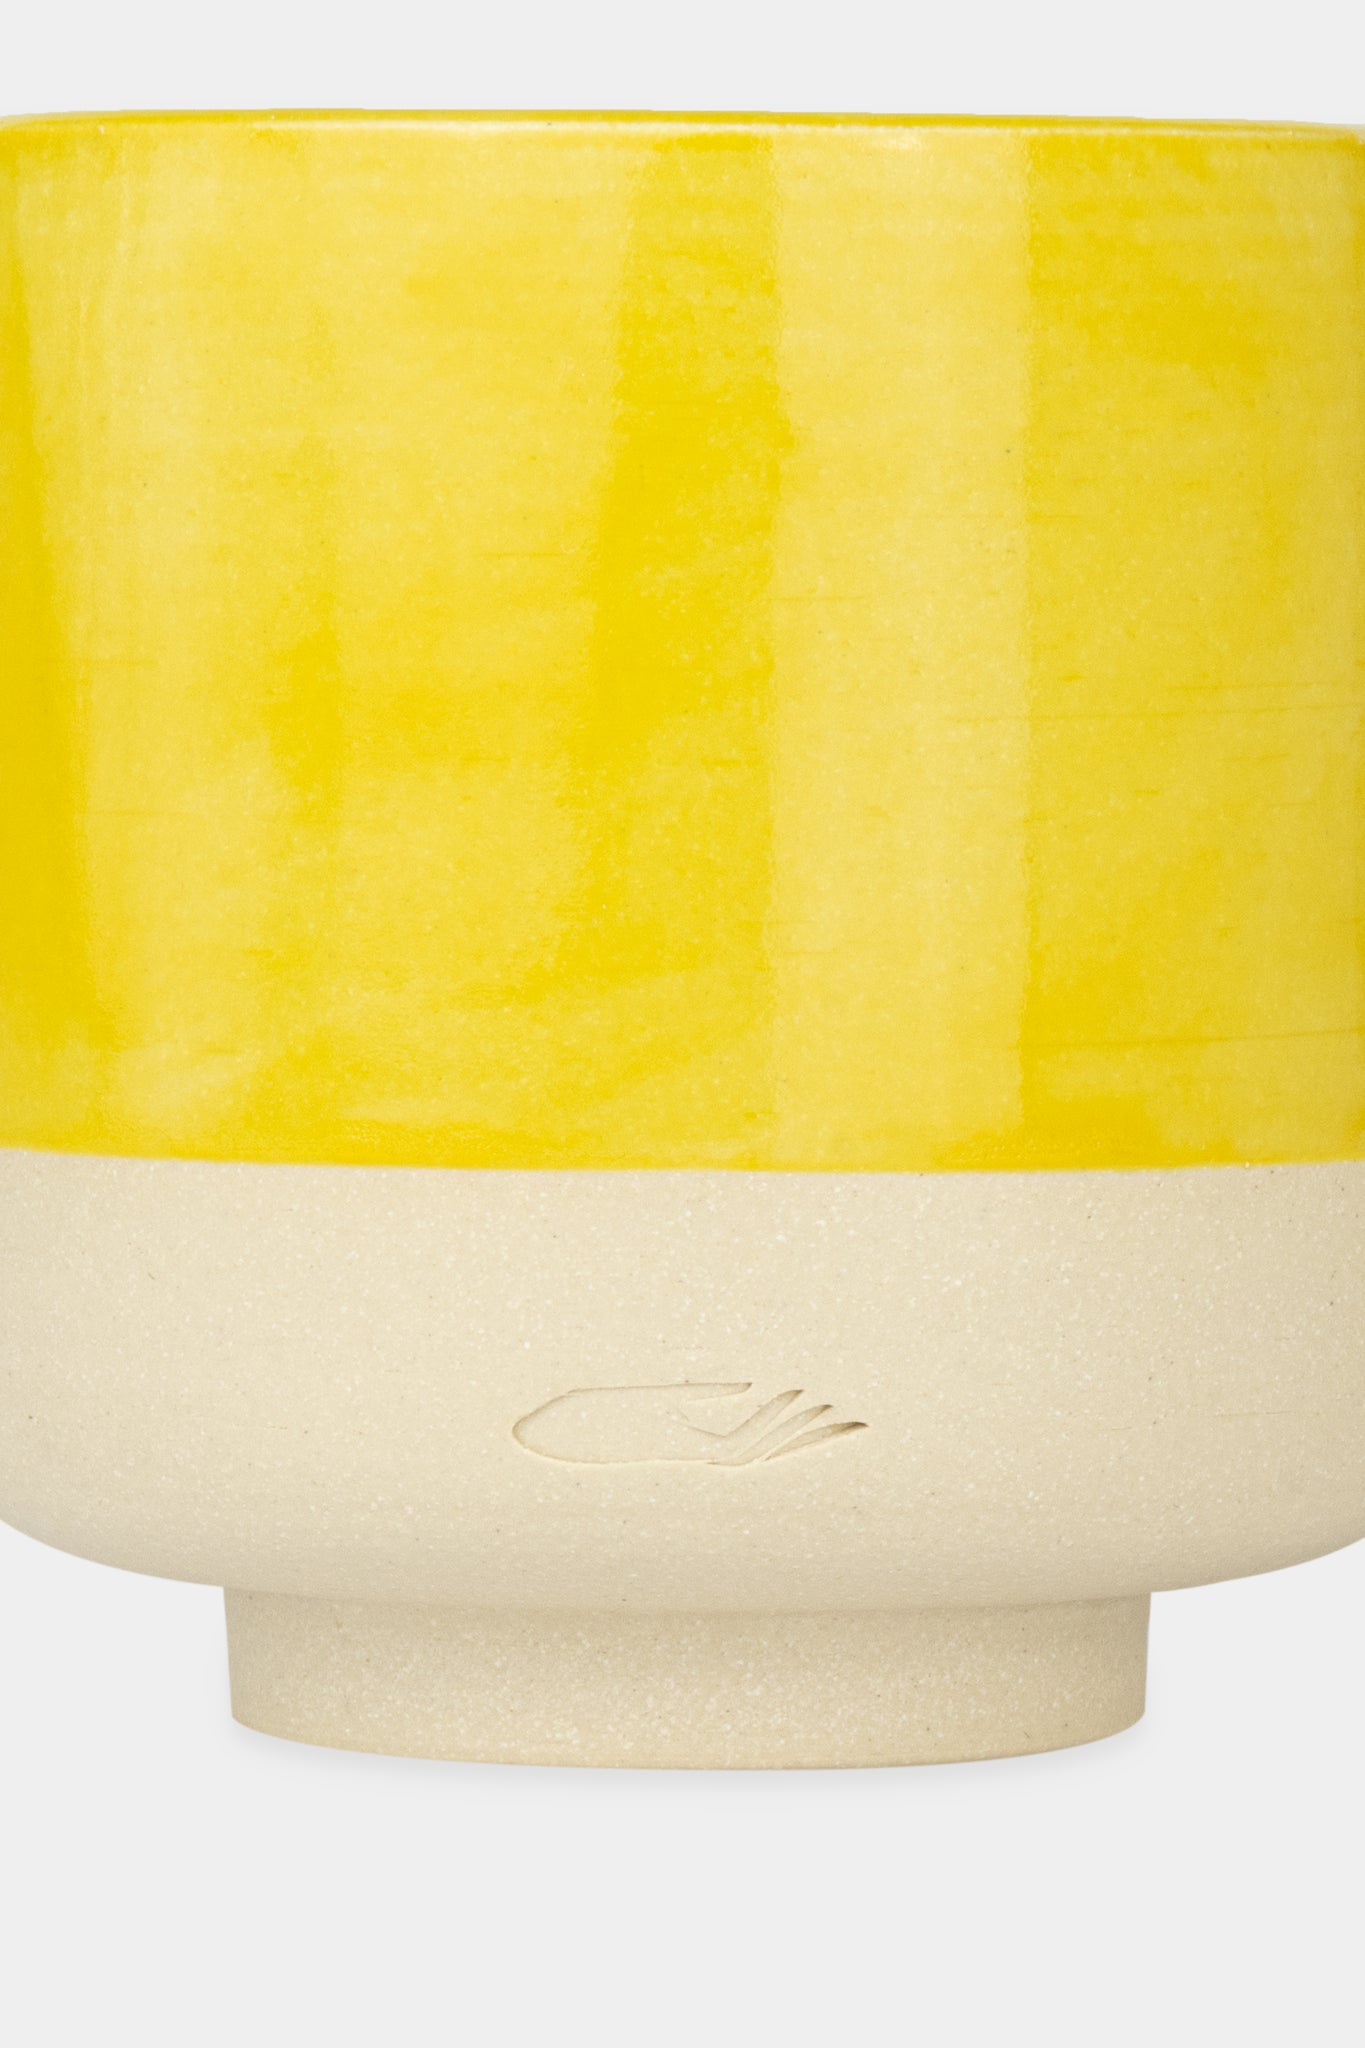 Details of Provide yellow glazed ceramic cup with hand logo imprint